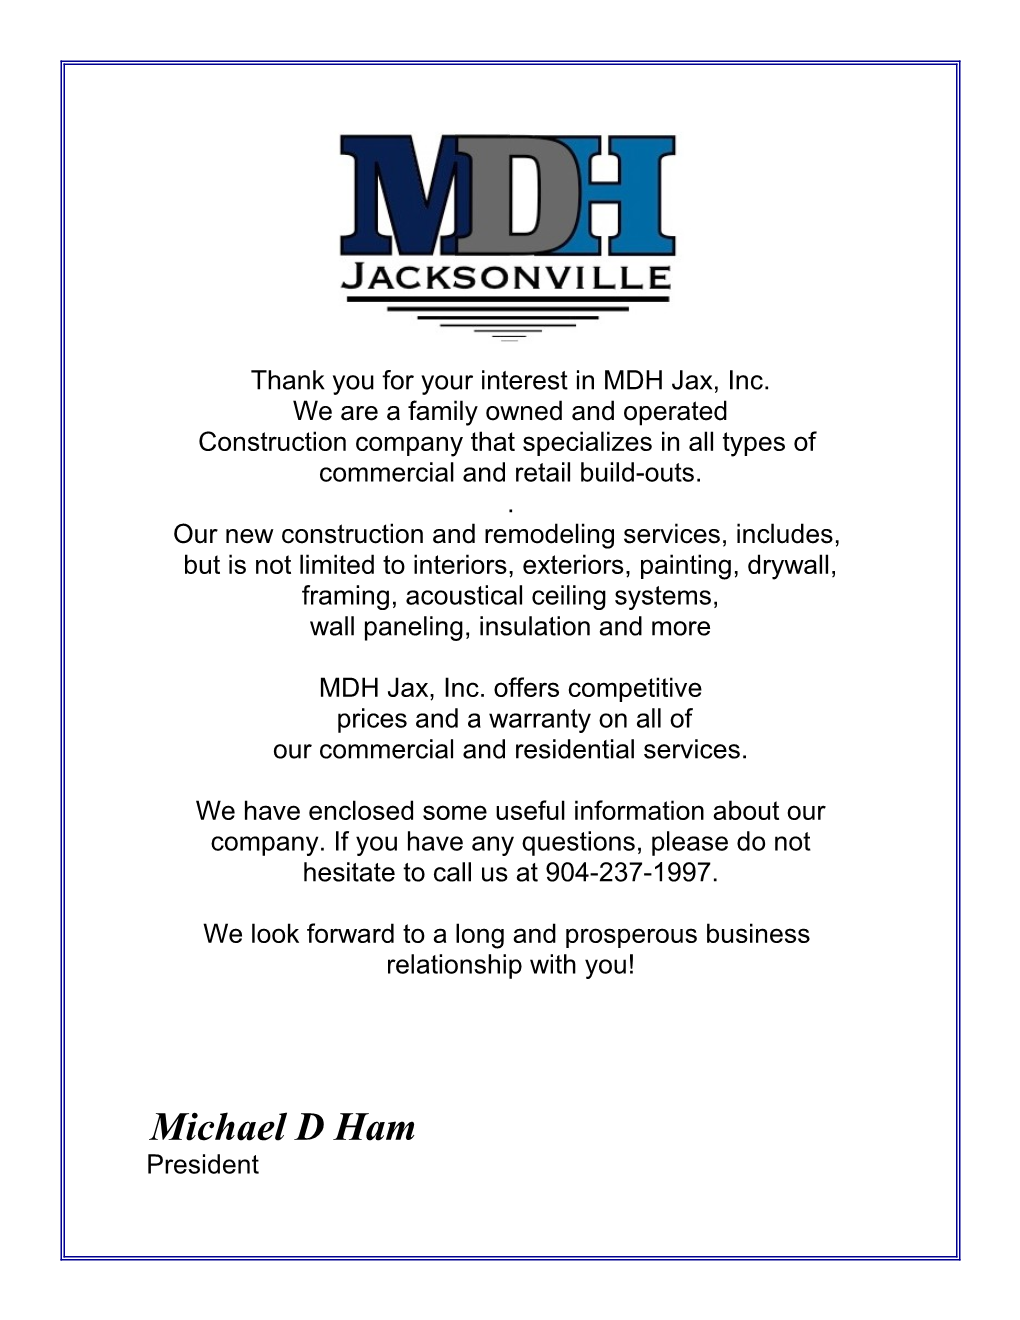 Thank You for Your Interest in MDH Jax, Inc